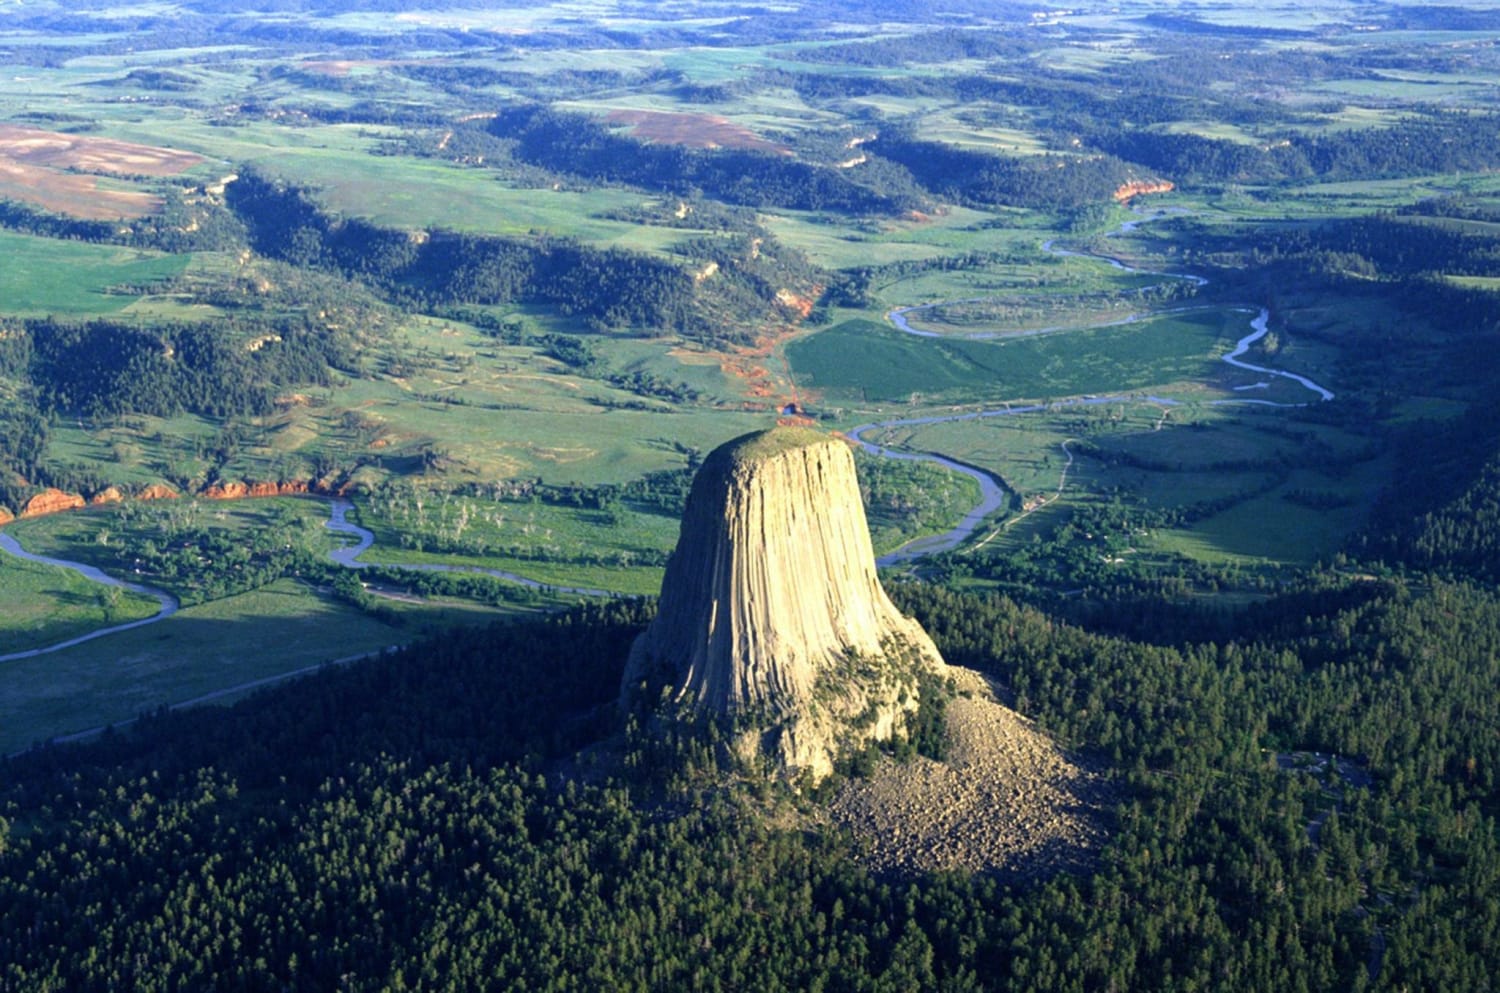 The majestic Devil’s Tower